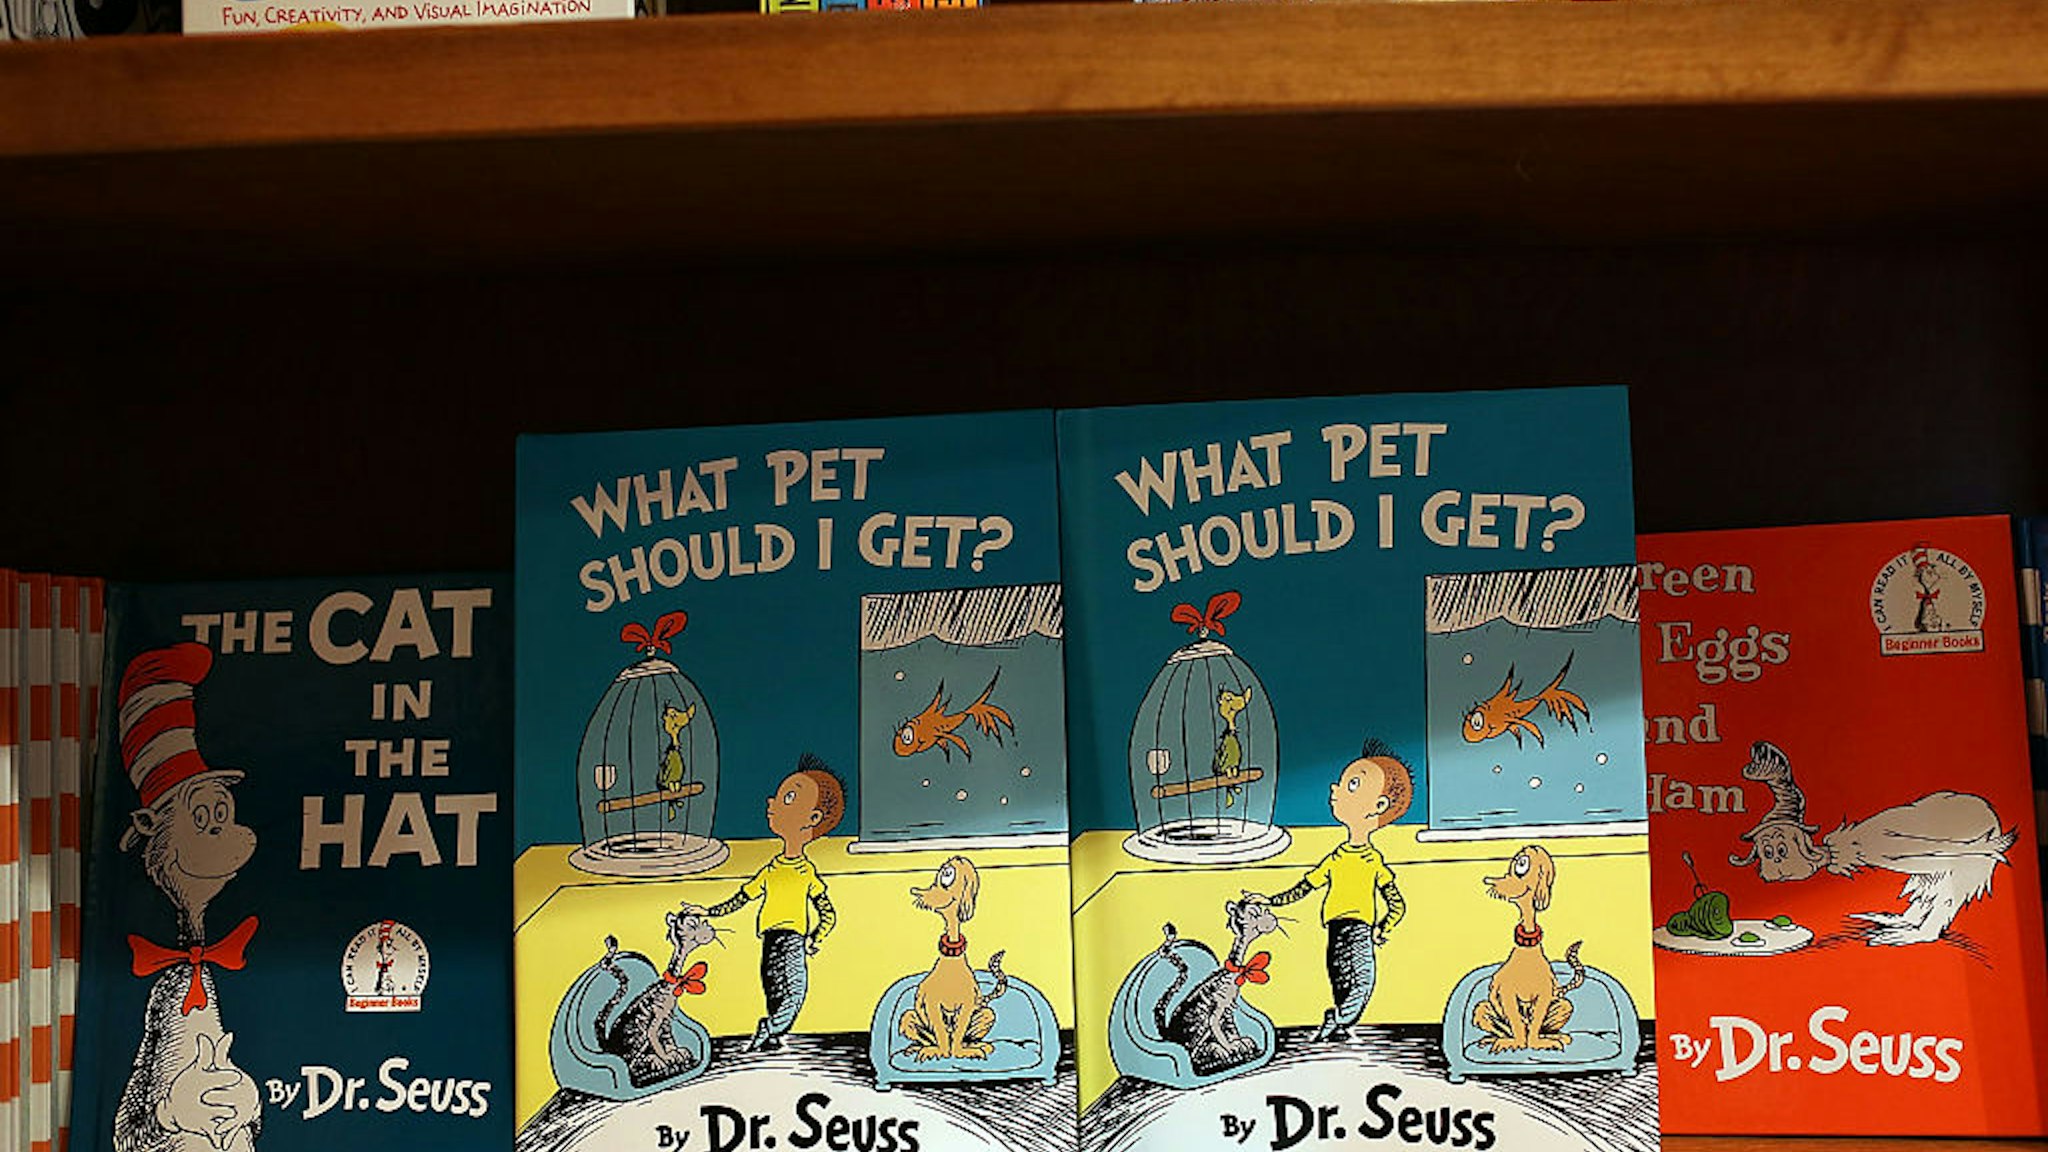 CORAL GABLES, FL - JULY 28: Dr. Seuss' never-before-published book, "What Pet Should I Get?" is seen on display on the day it is released for sale at the Books and Books store on July 28, 2015 in Coral Gables, United States. The manuscript by the author Theodor Geisel is reported to have been written in the 1950s or 1960s and stashed away in his office until his widow found it in 2013.